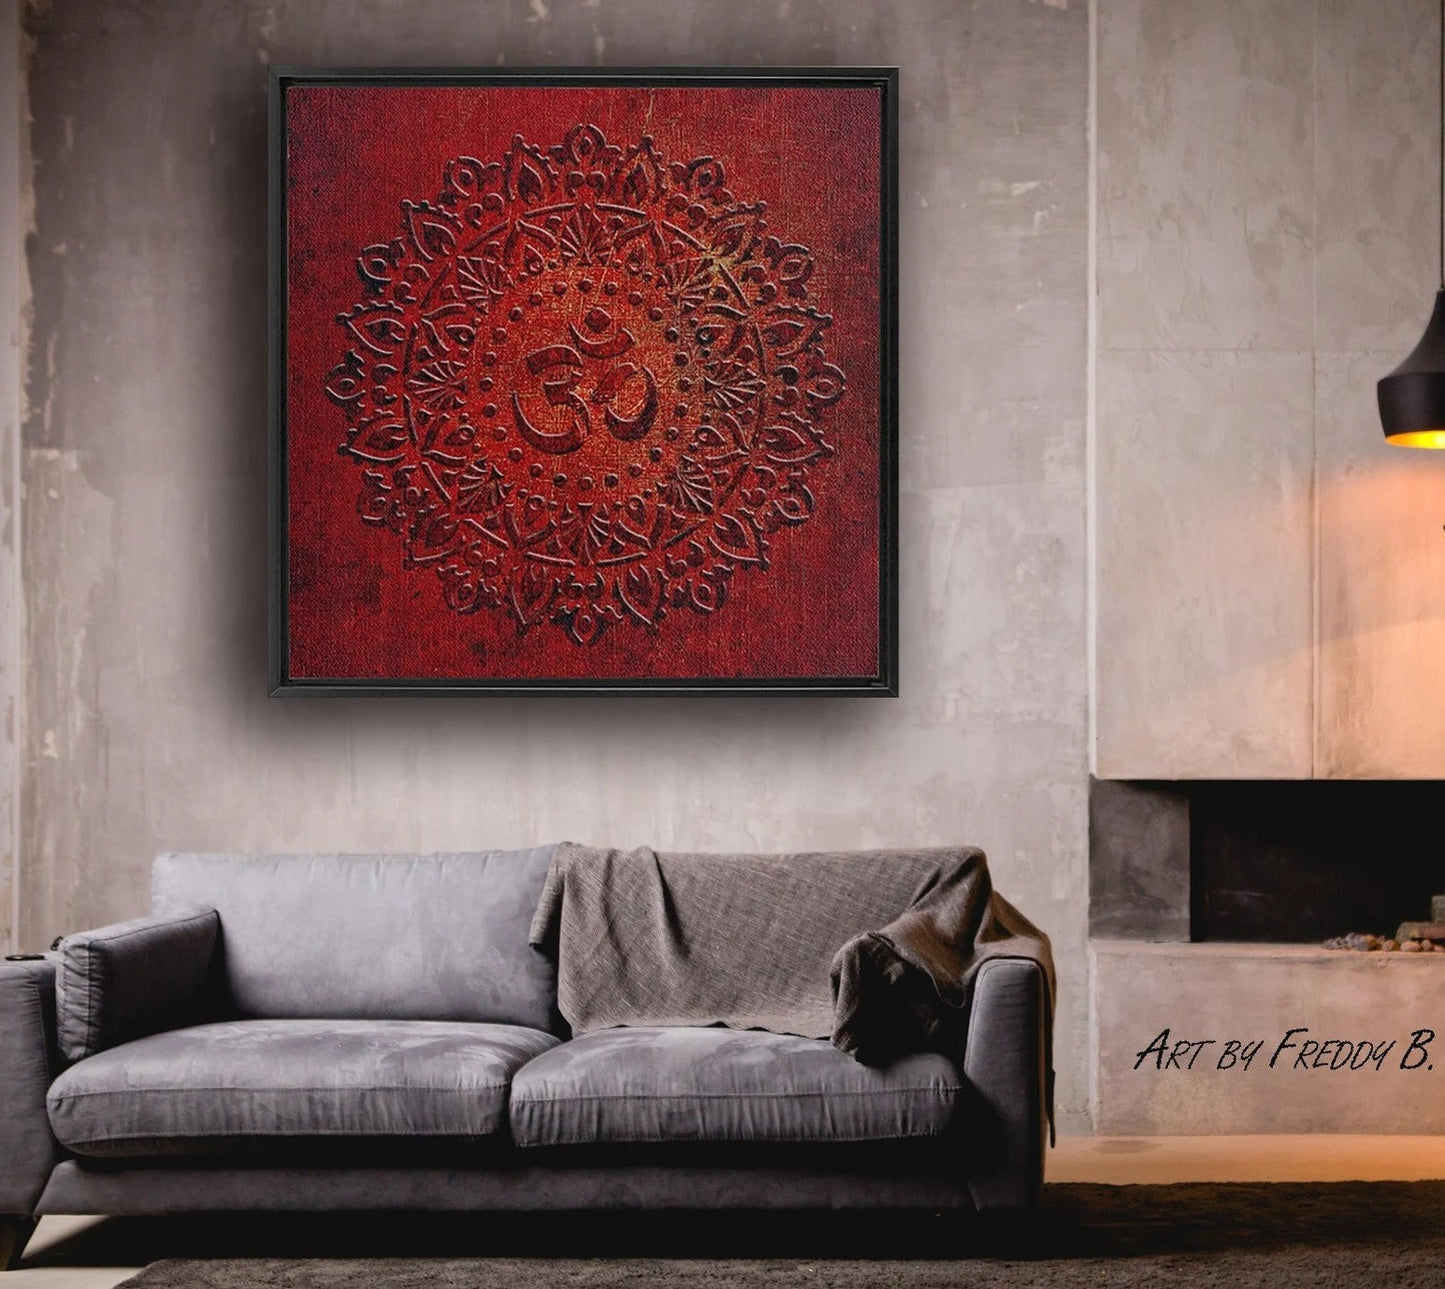 Om Symbol Mandala Style on Lava Red Background Printed on Canvas in a Floating Frame hung in modern loft